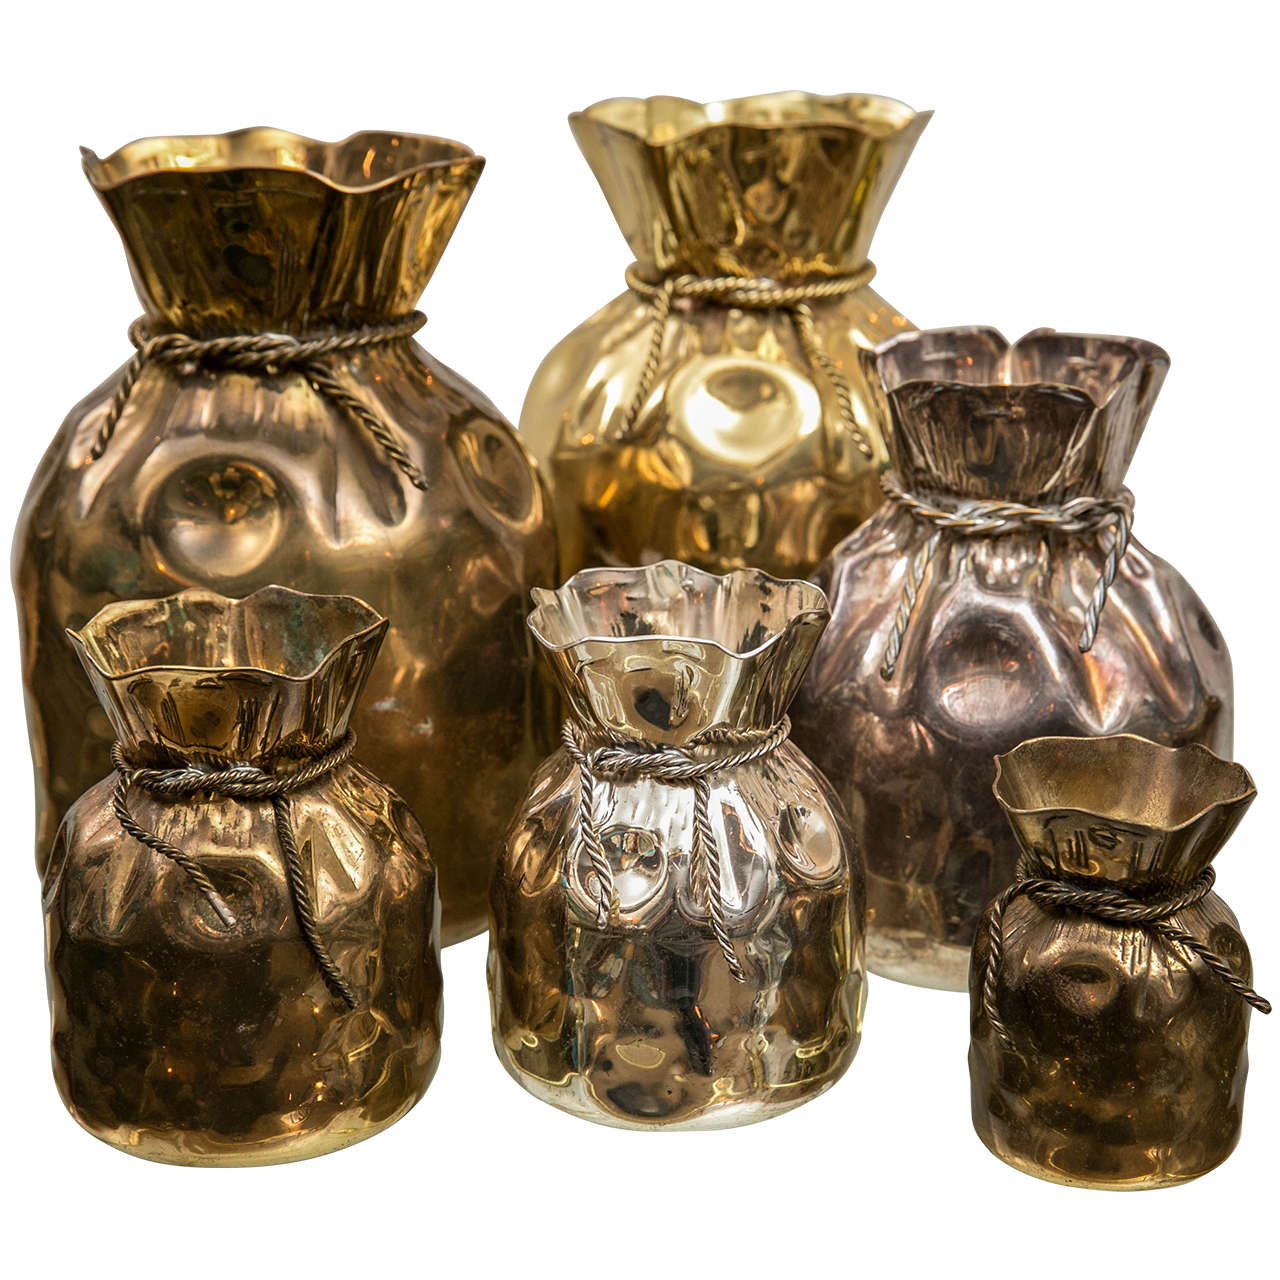 Collection of Brass and Silver "Money Sack" Vessels